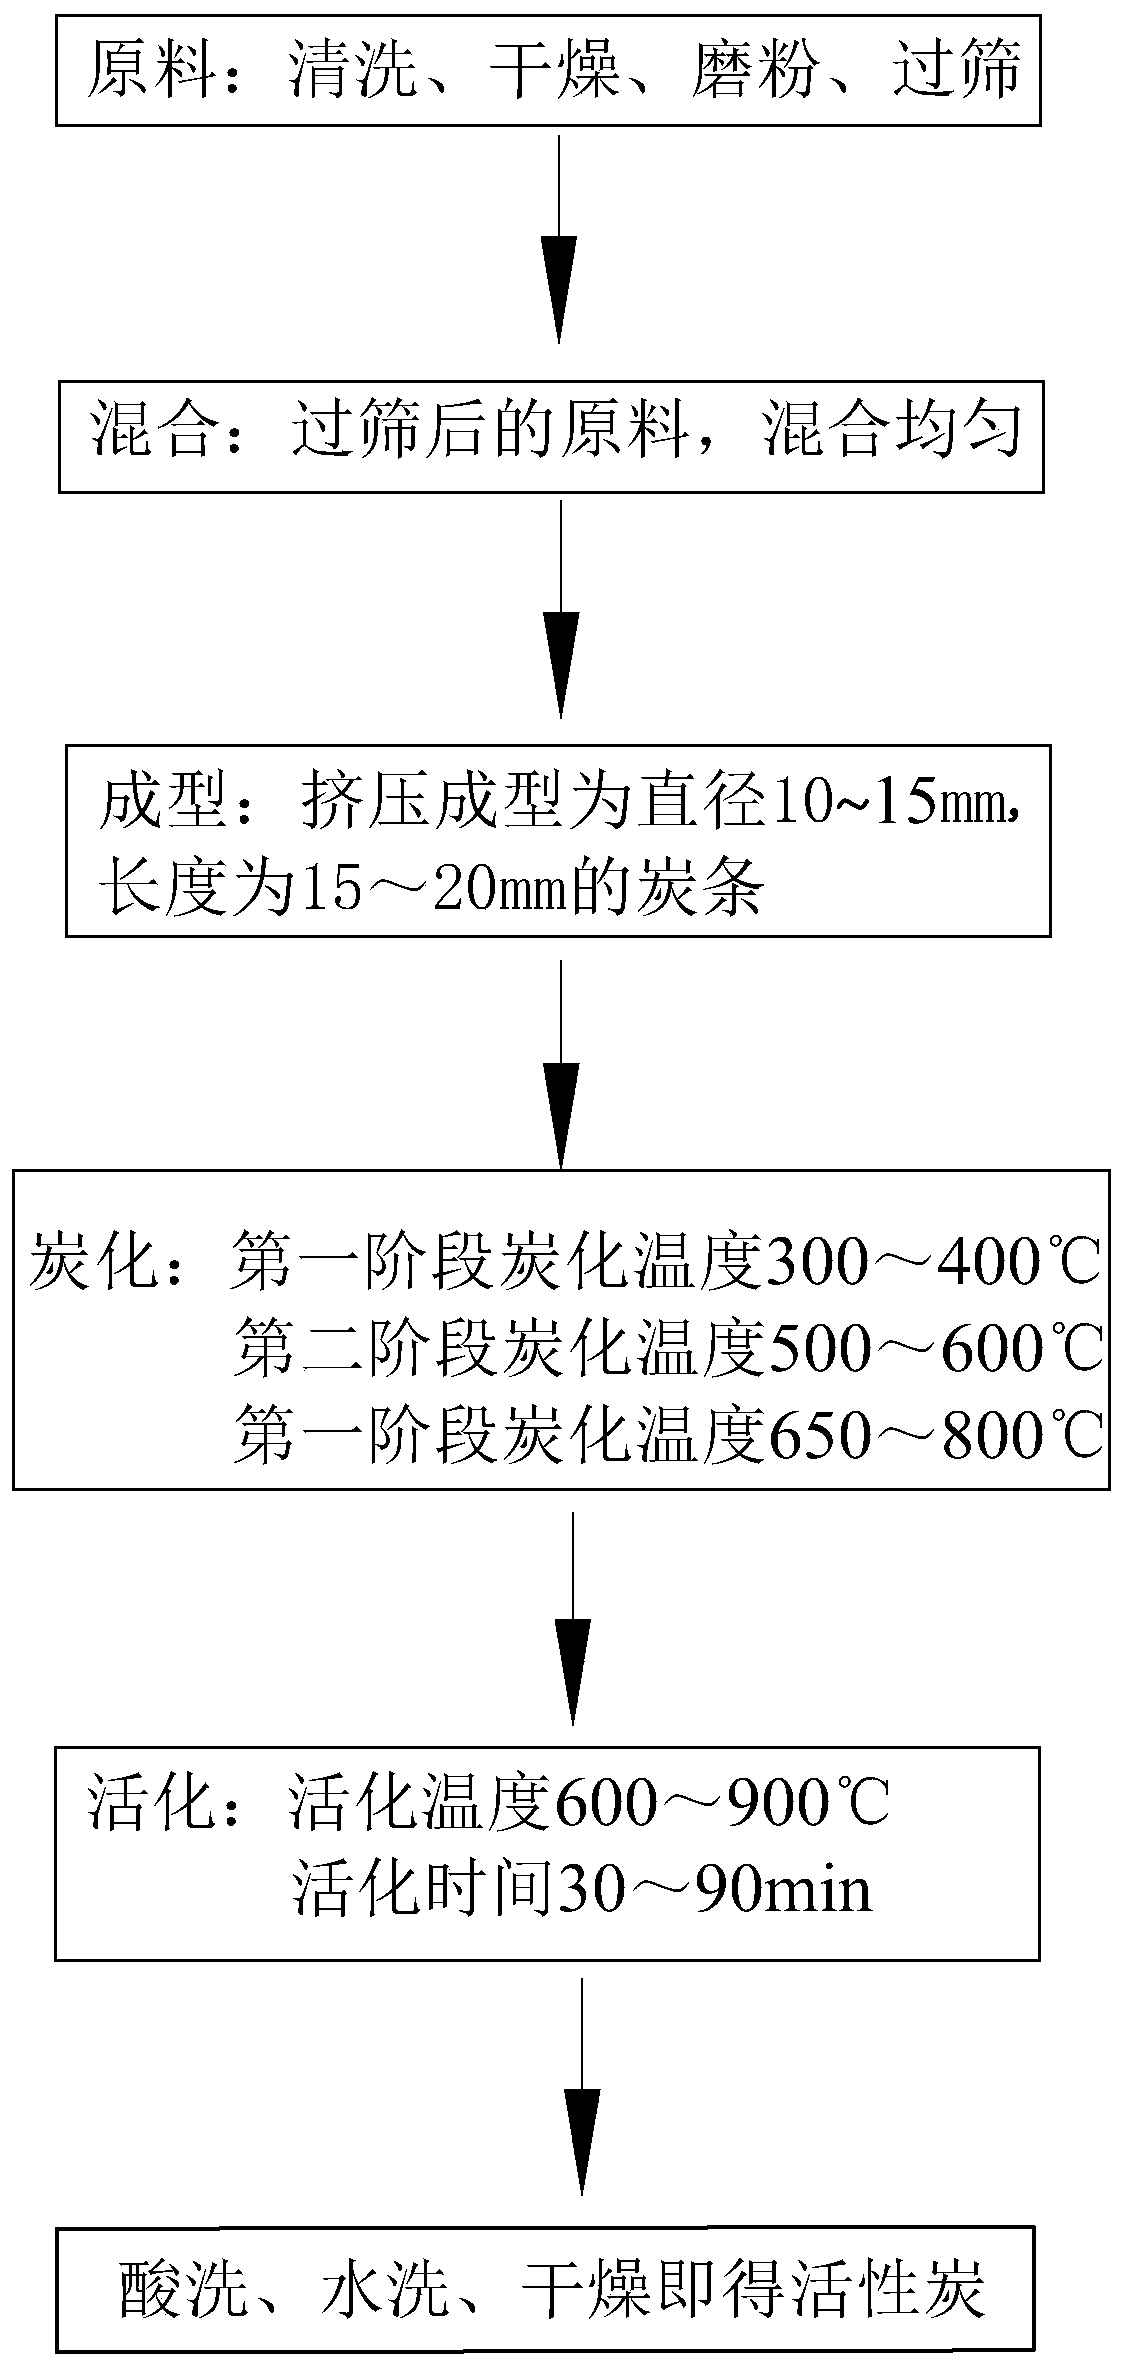 Preparation method of activated carbon